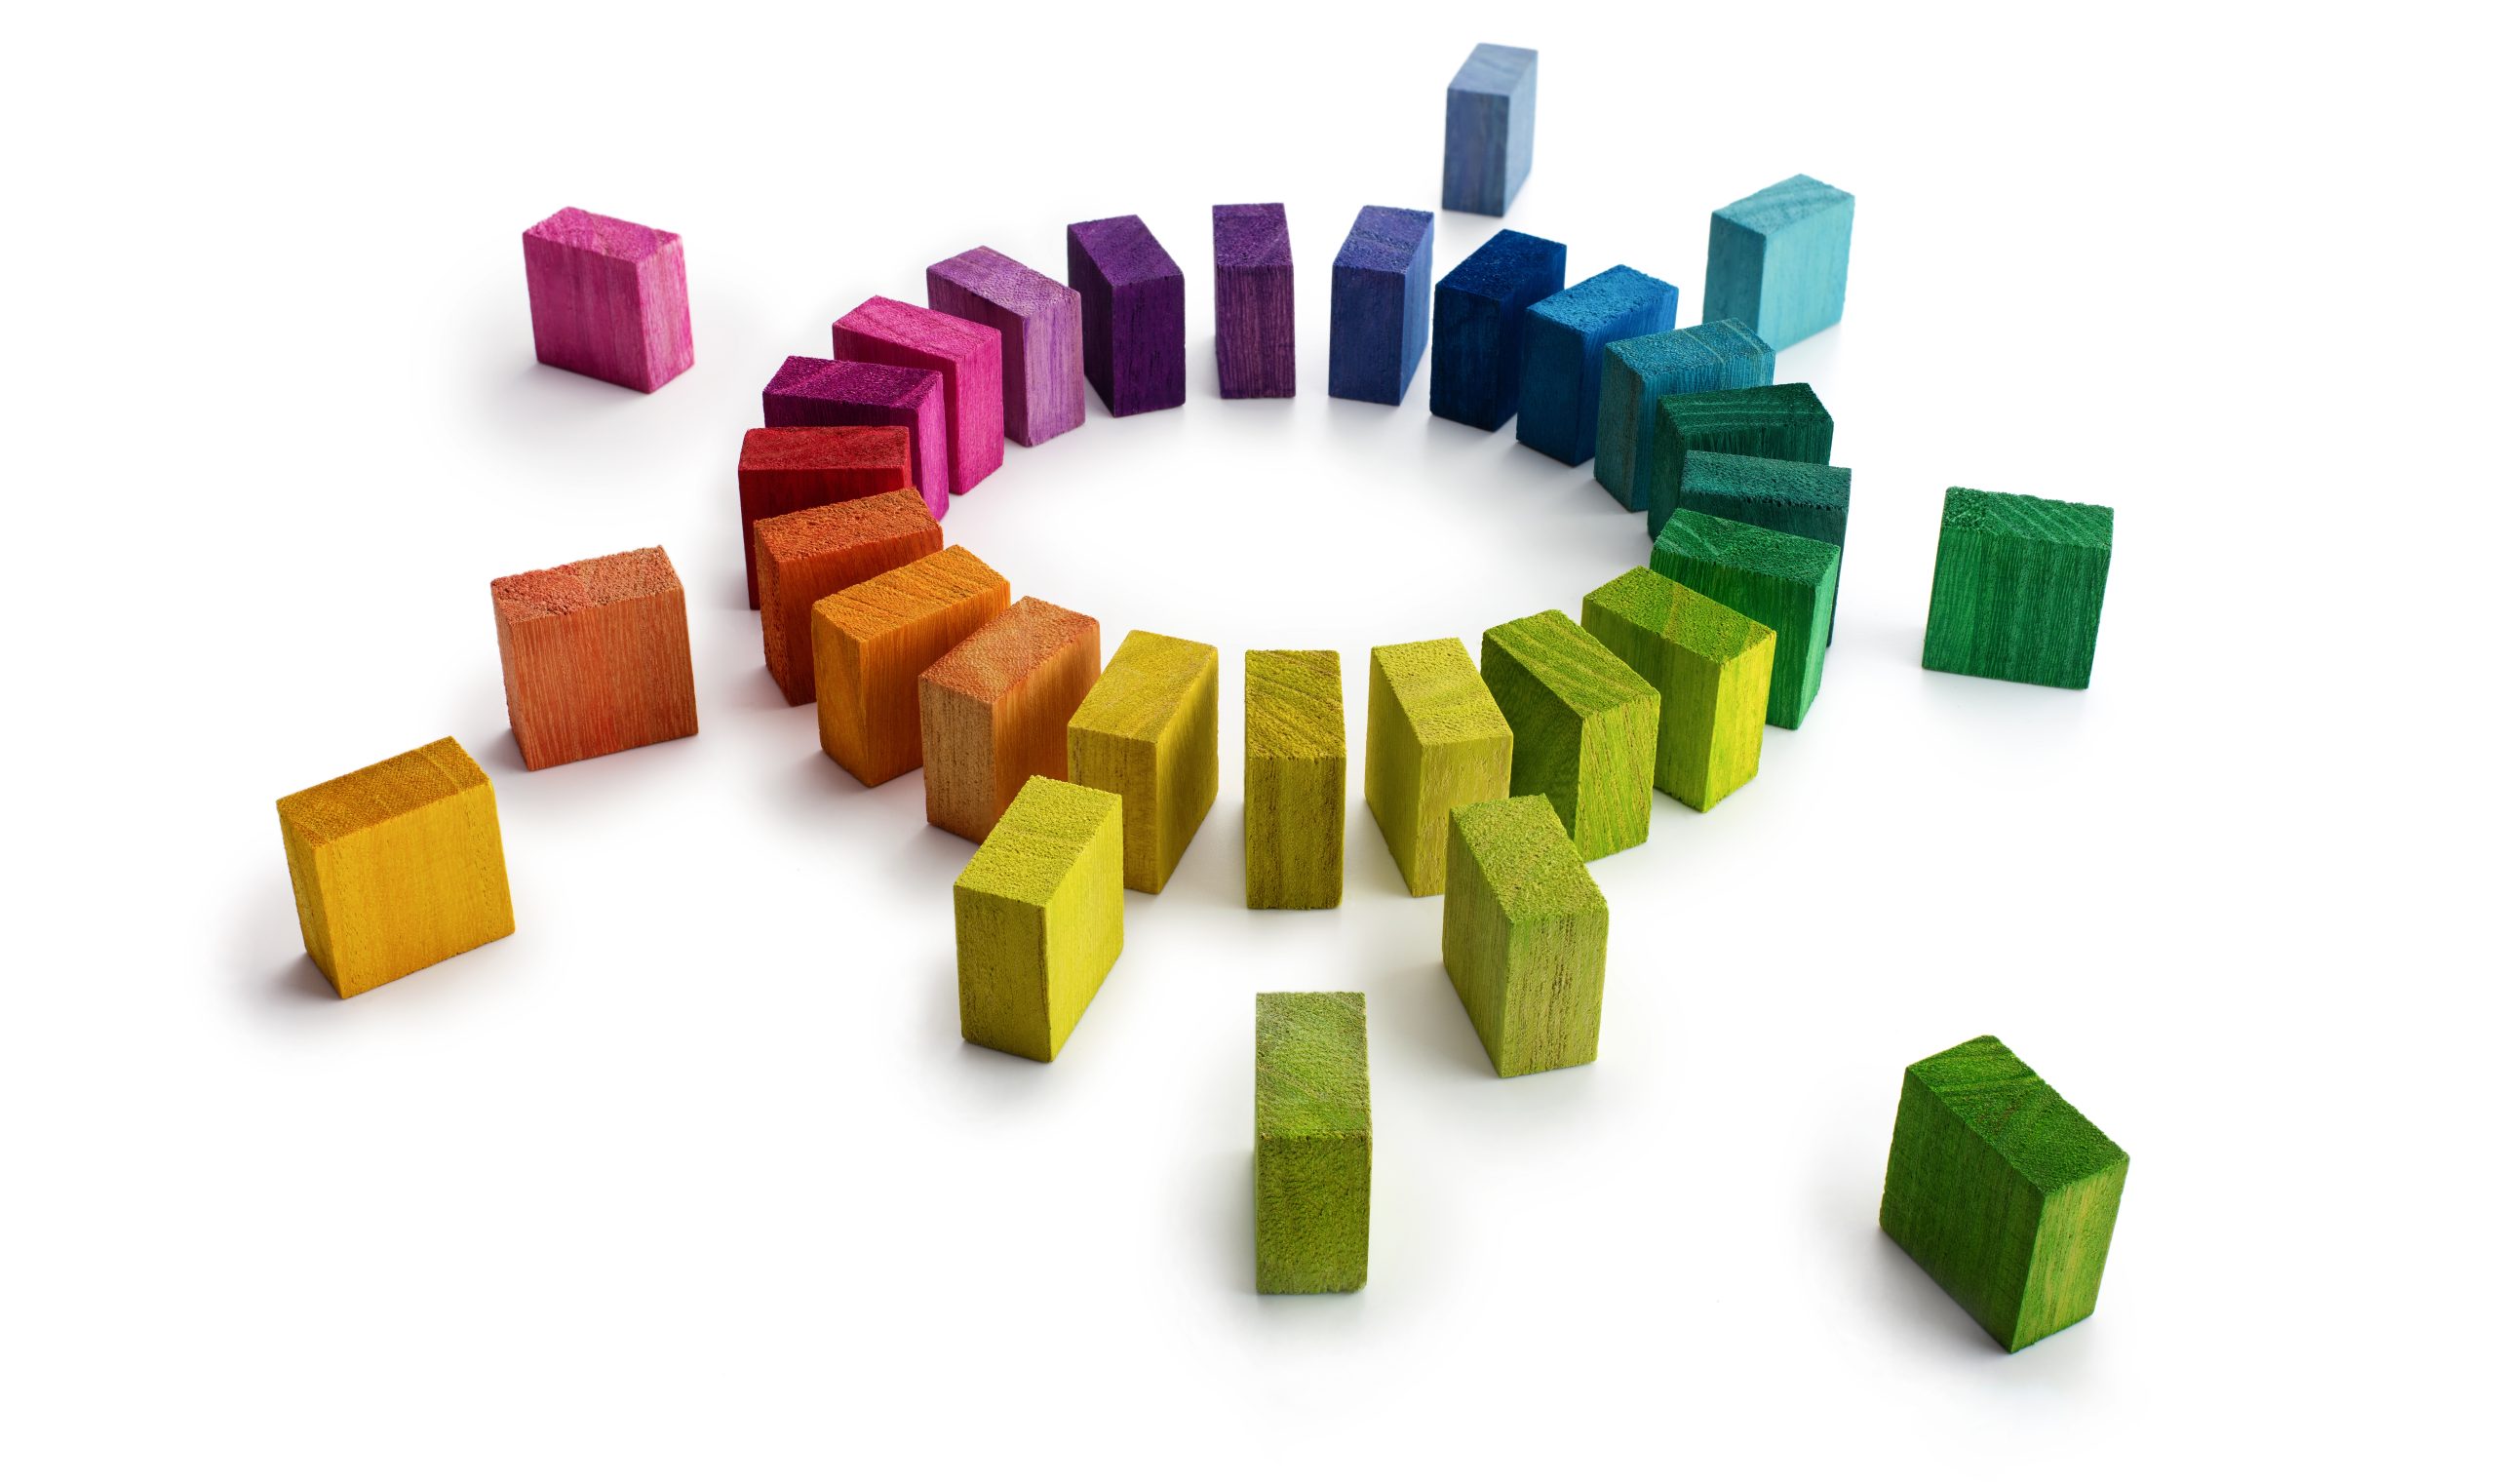 Image of rainbow of coloured blocks arranged in a circle with a number of additional coloured blocks randomly arranged around the edge of the circle.